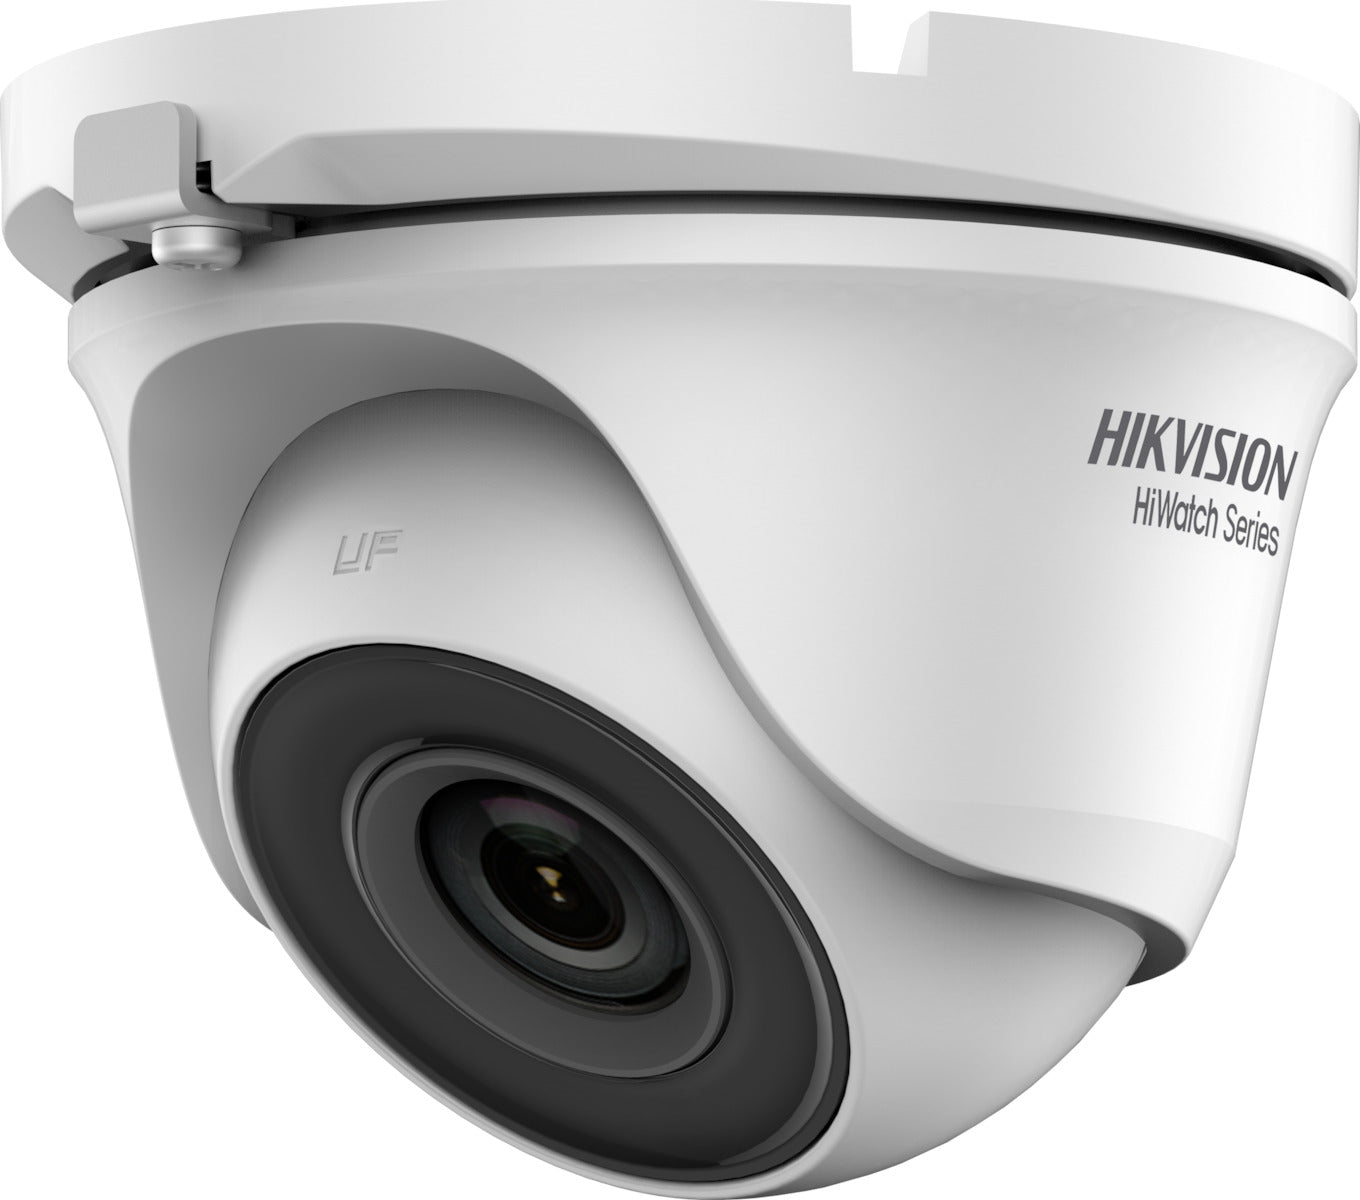 HIKVISION HiWatch HWT-T120-M 2.8mm Dome Surveillance Camera 2MP 1080p, 4in1, IP66, Smart IR 20m - Metal